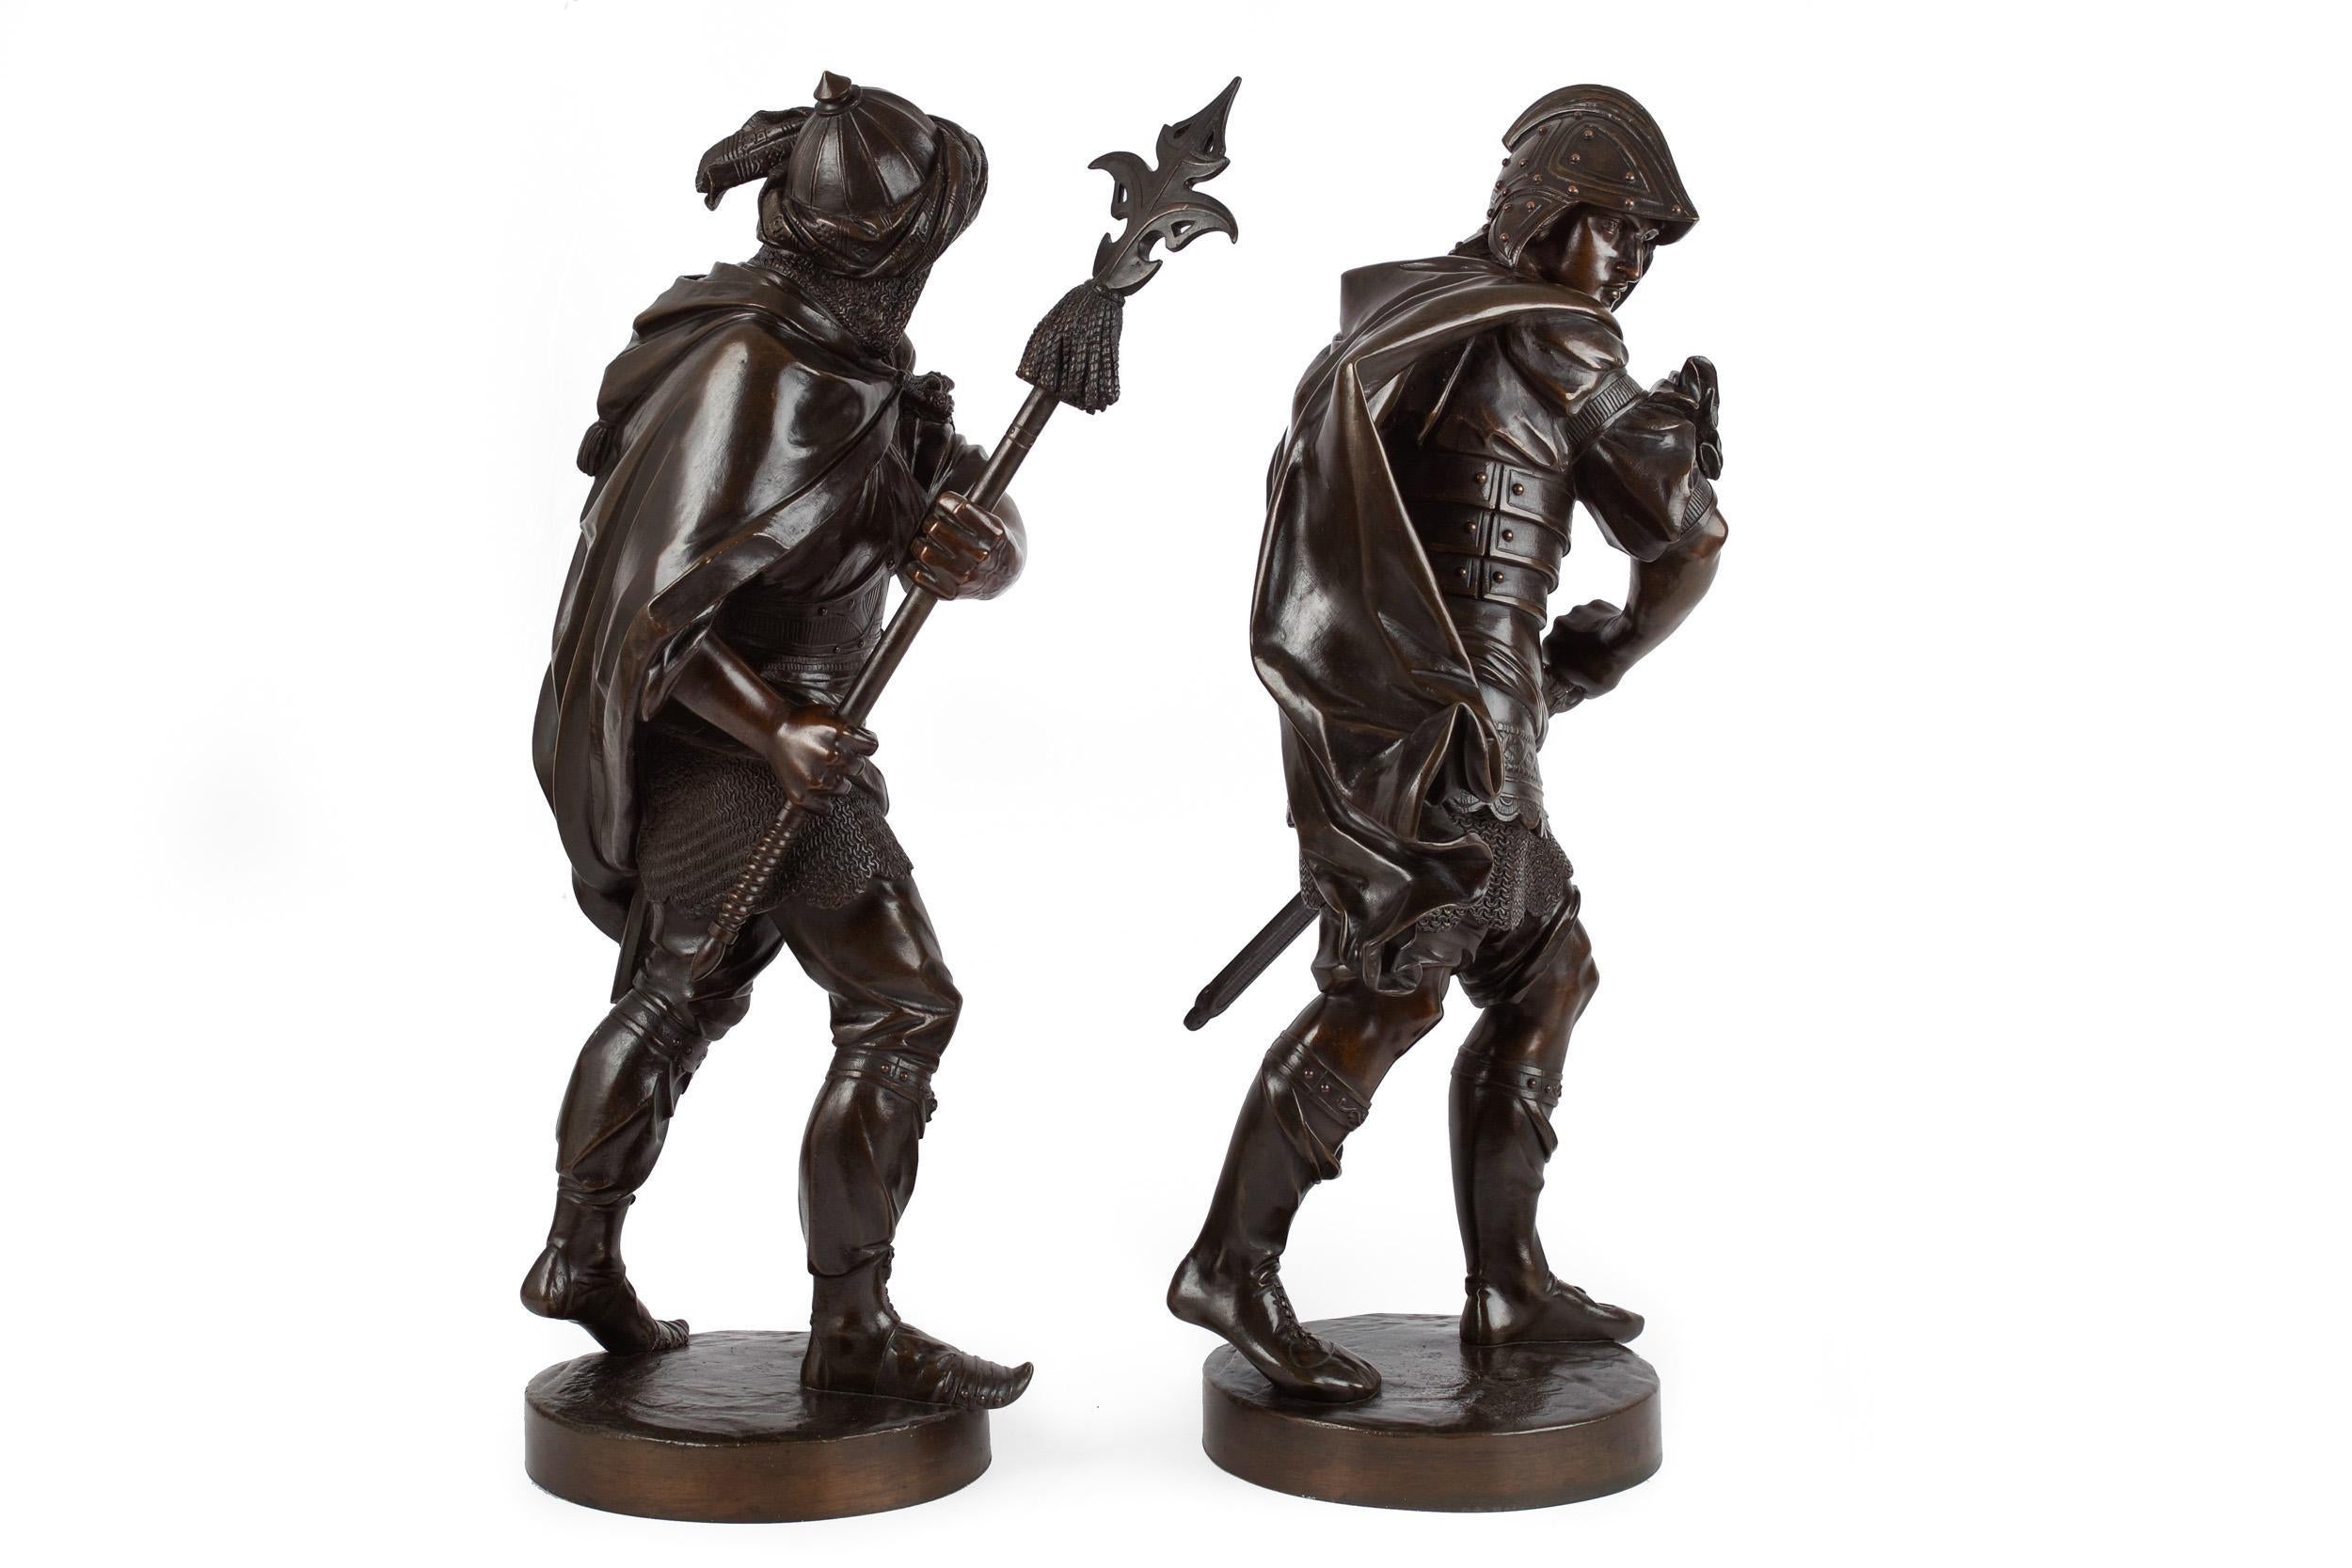 A good pair of late 19th century bronze castings after the models of 16th century warriors by Albert Ernest Carrier-Belleuse. They are unsigned, but a known pair executed as part of Carrier-Belleuse's series of warriors ancient through modern. The